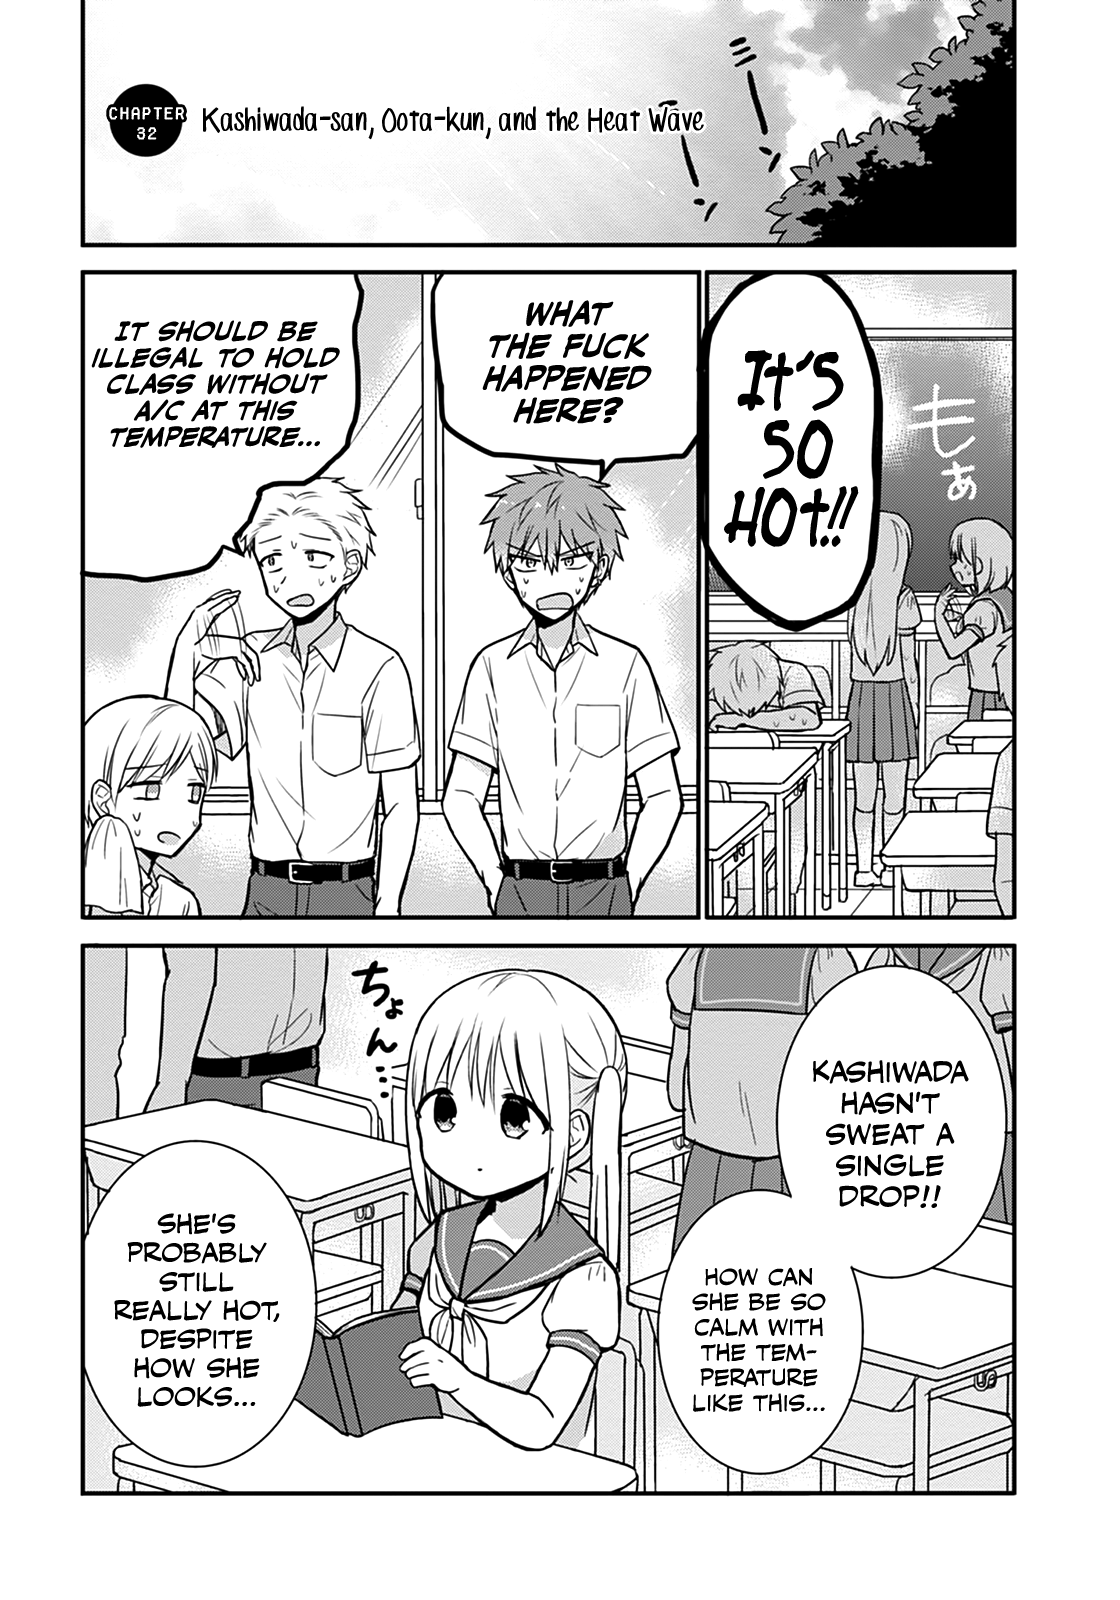 Expressionless Kashiwada-San And Emotional Oota-Kun Vol.3 Chapter 32: Kashiwada-San, Oota-Kun, And The Heat Wave - Picture 2